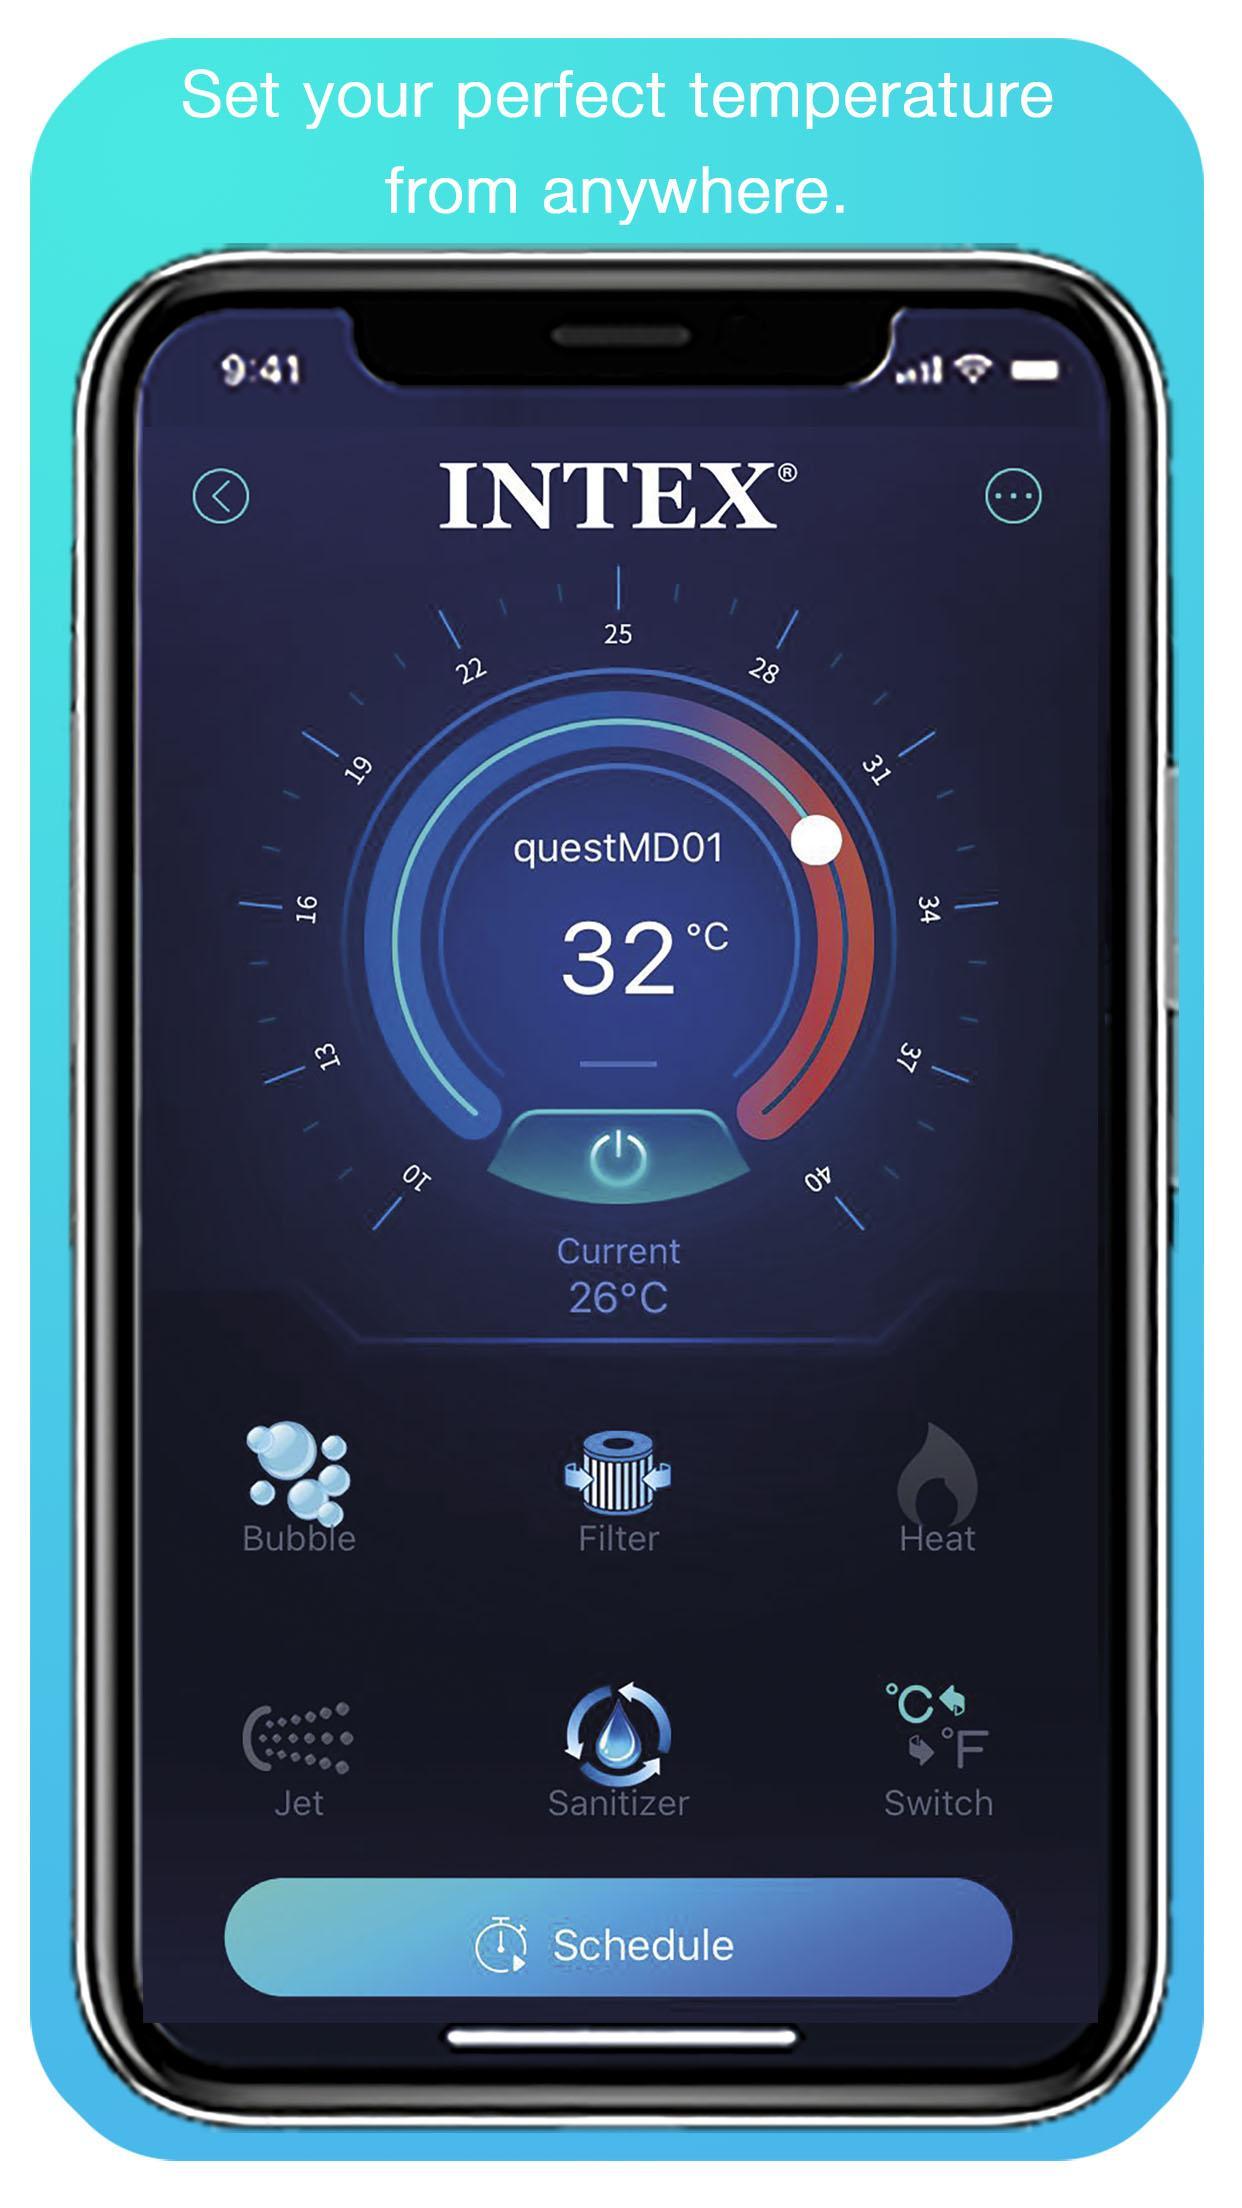 Intex for Android - APK Download